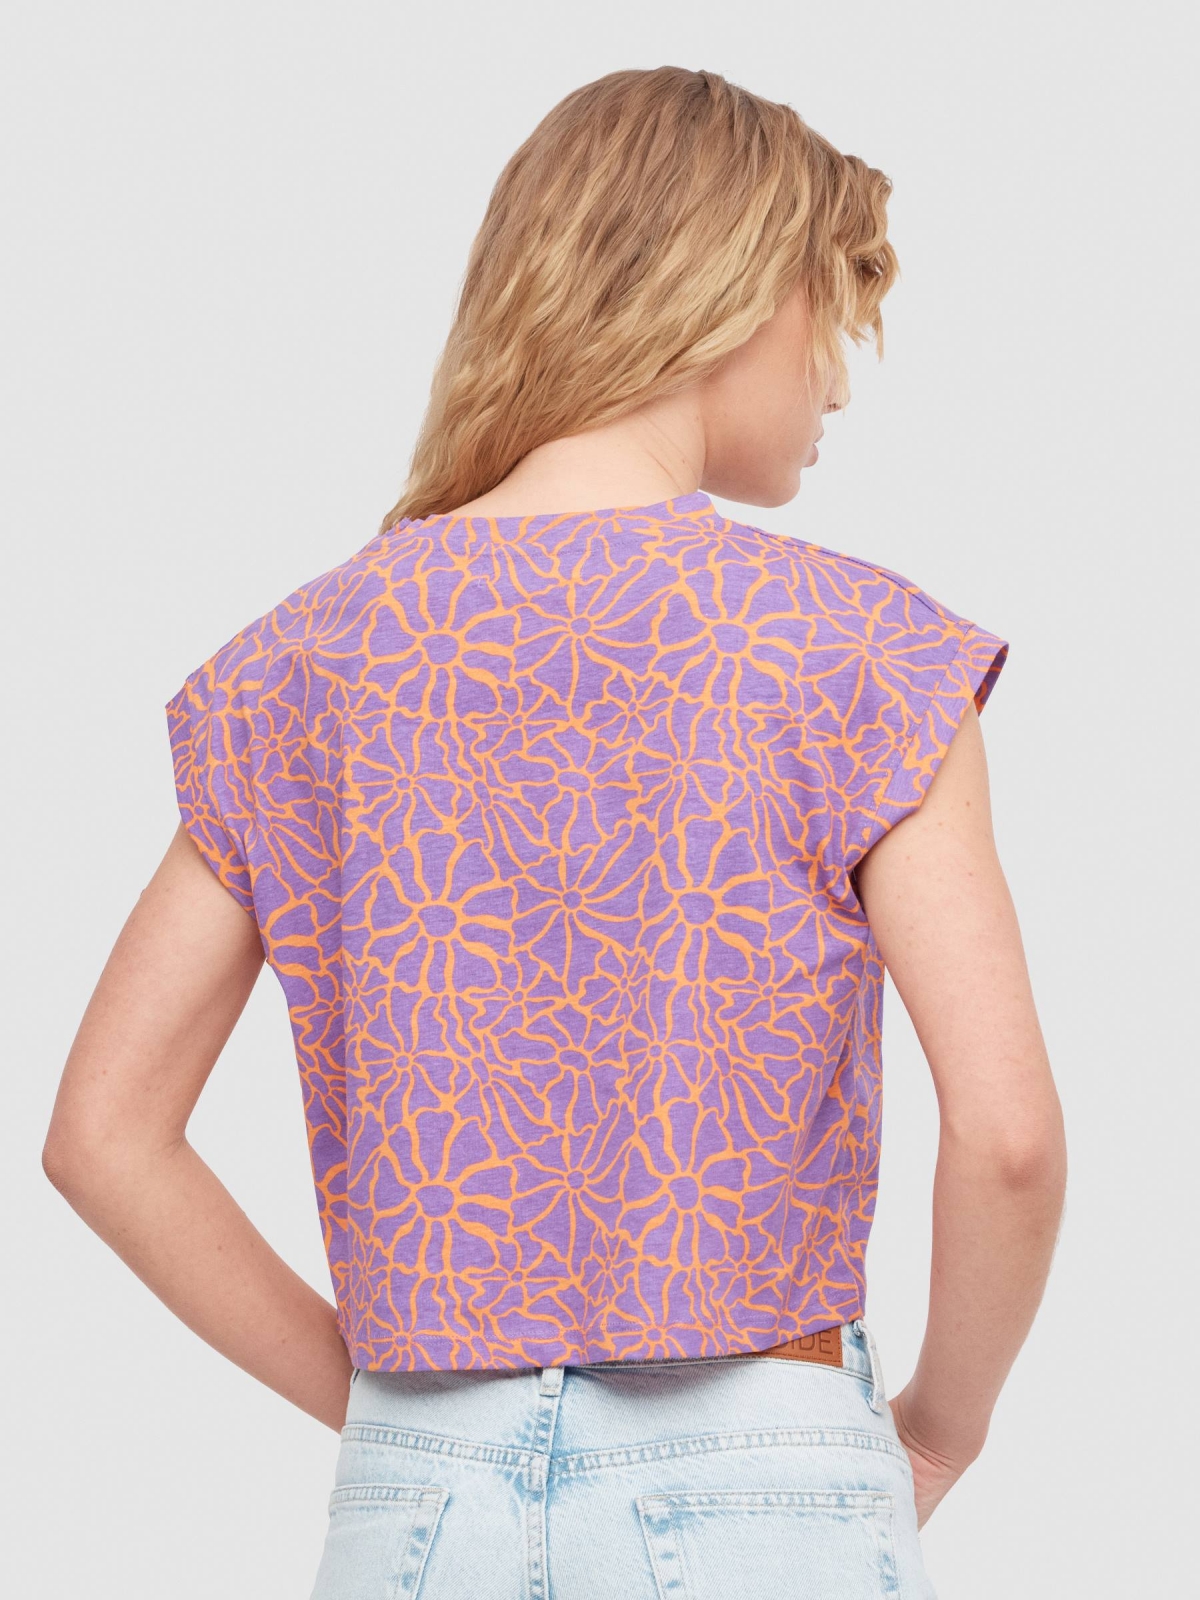 Flowers crop top lilac middle back view